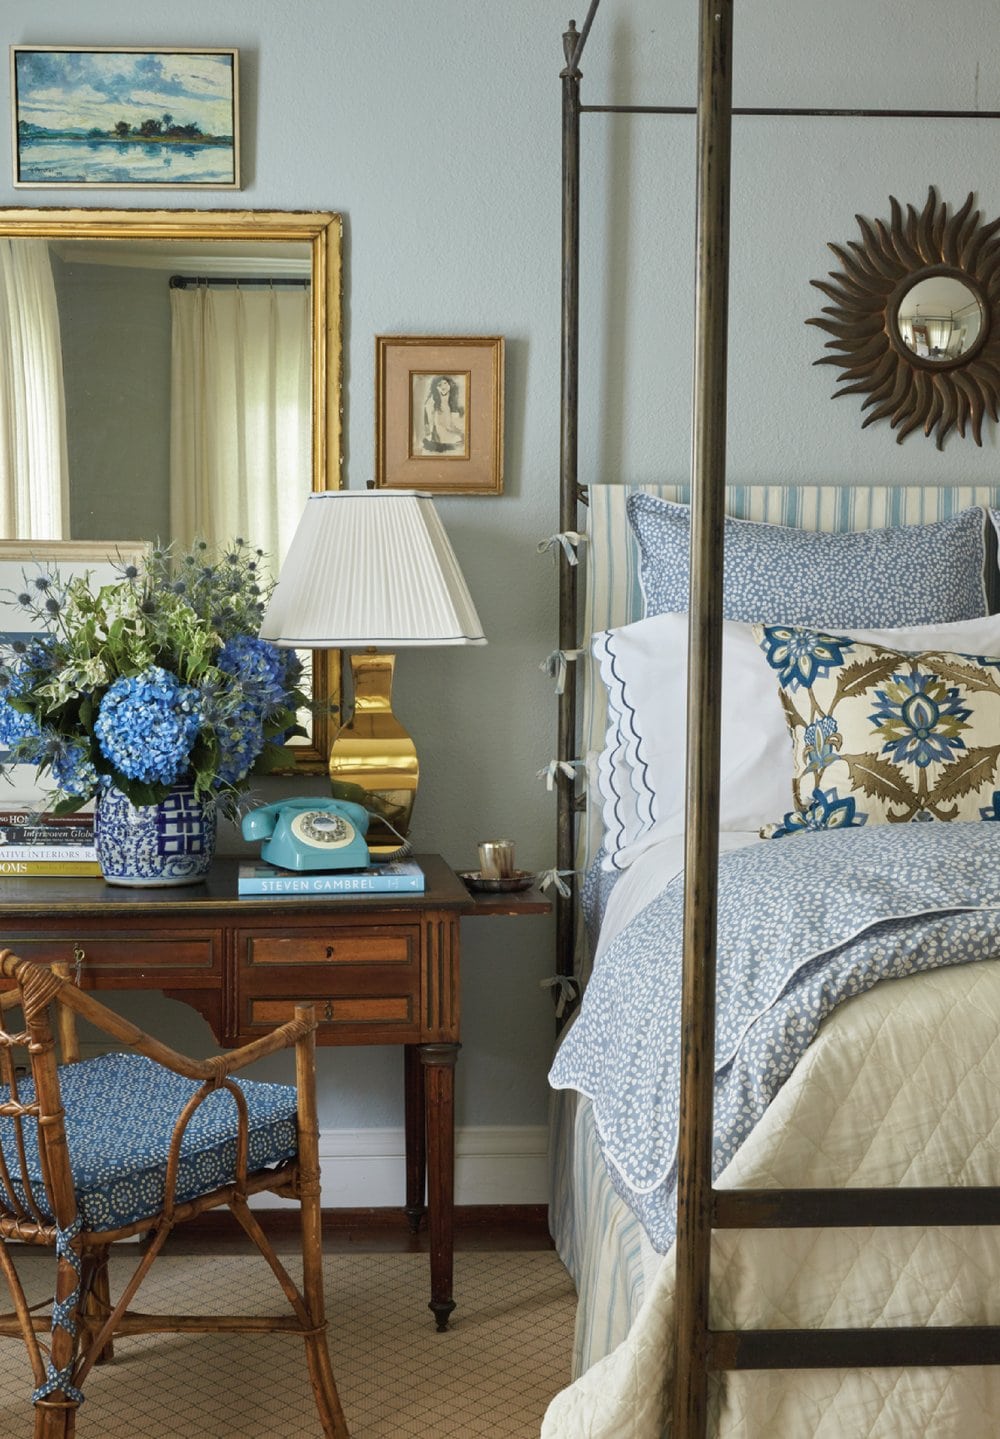 Bedroom featuring chinoiserie vase in interiors designed by Heather Chadduck